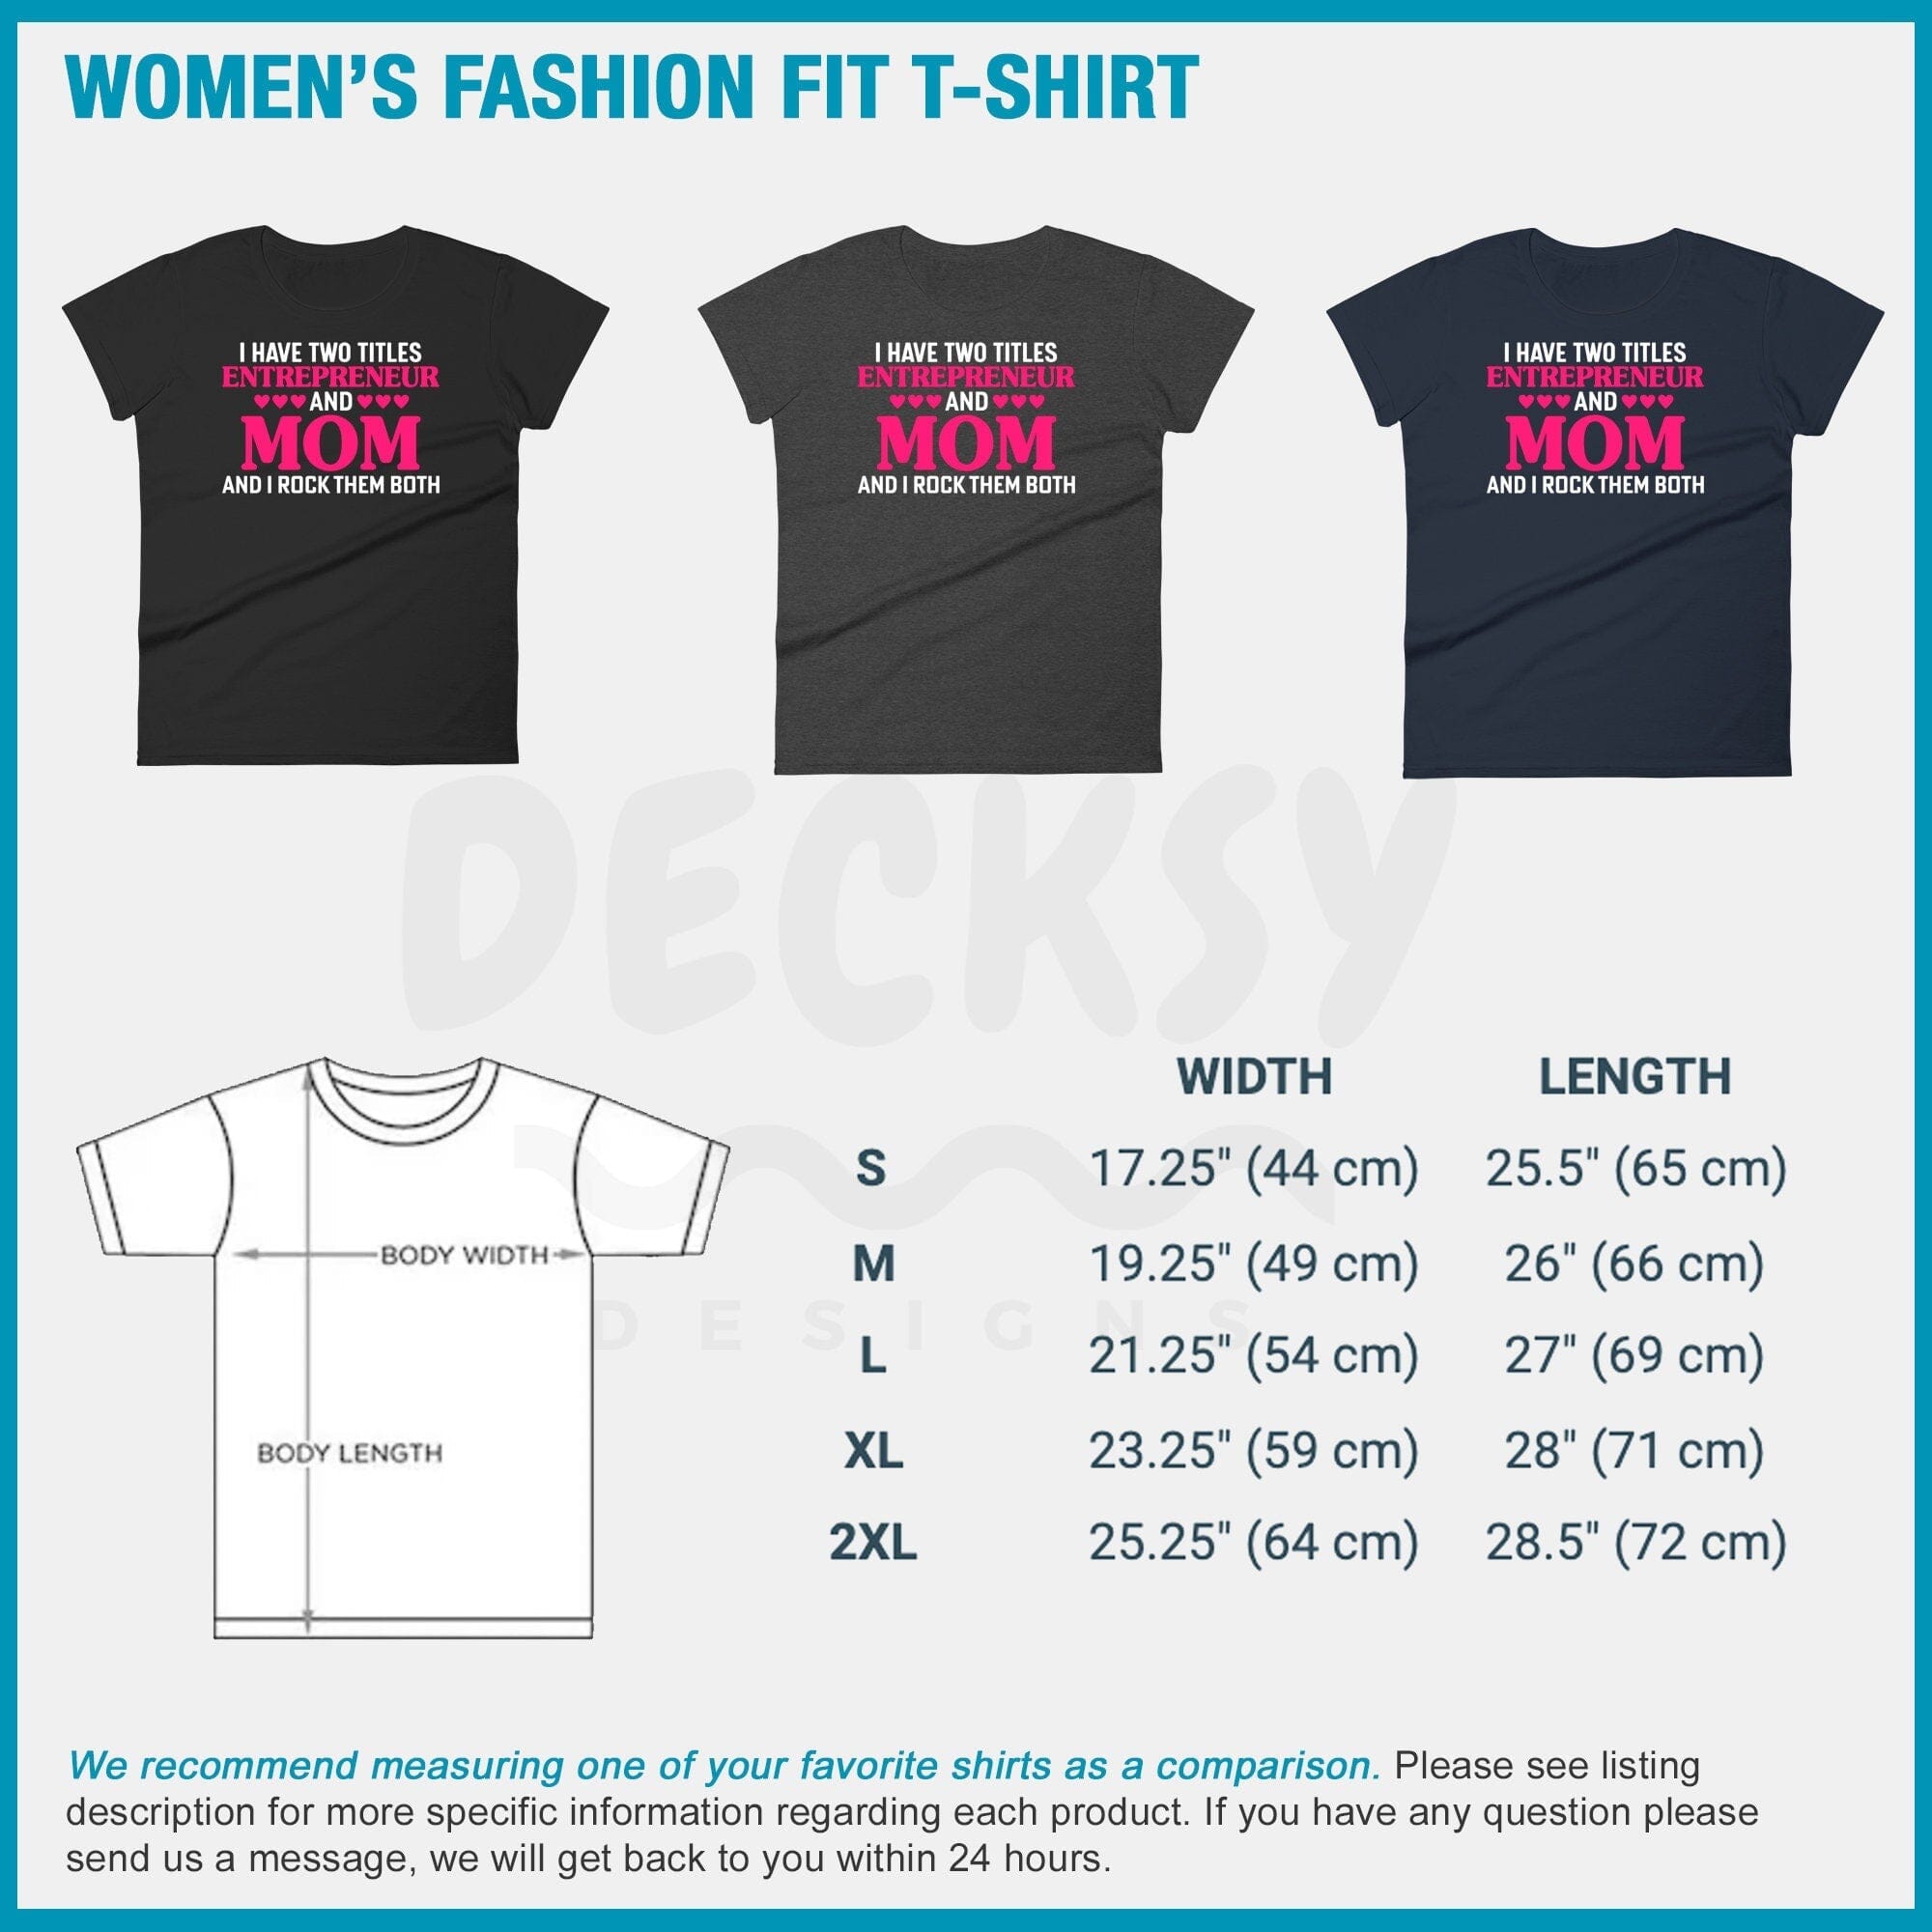 Entrepreneur Mom Shirt, Mother's Day Gift-Clothing:Gender-Neutral Adult Clothing:Tops & Tees:T-shirts:Graphic Tees-DecksyDesigns